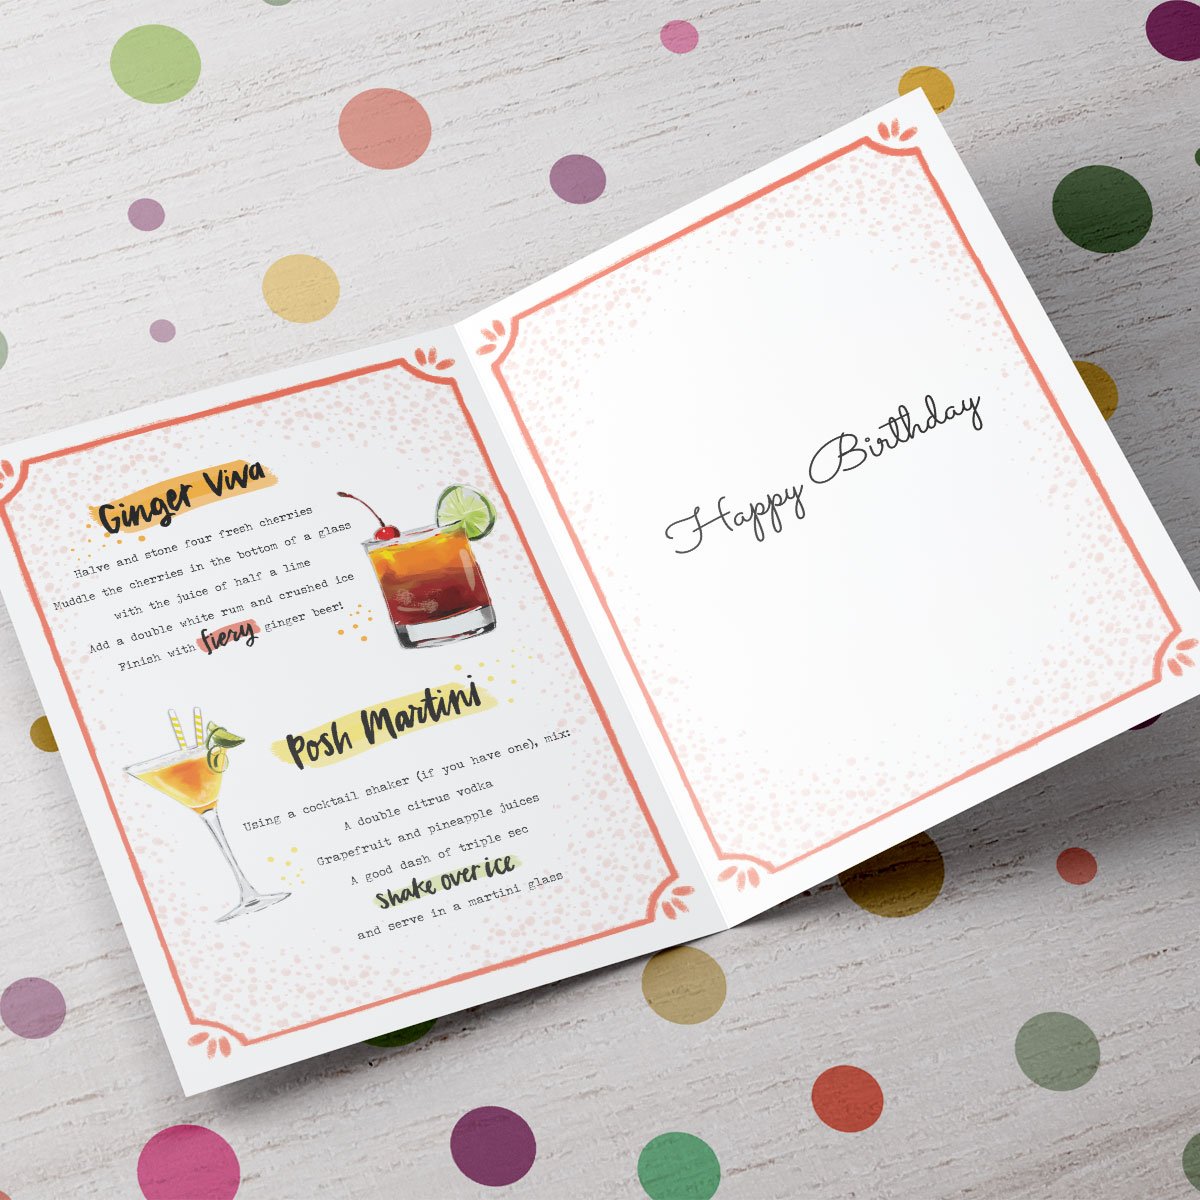 Personalised Any Age Birthday Card - Spice Up Your Birthday